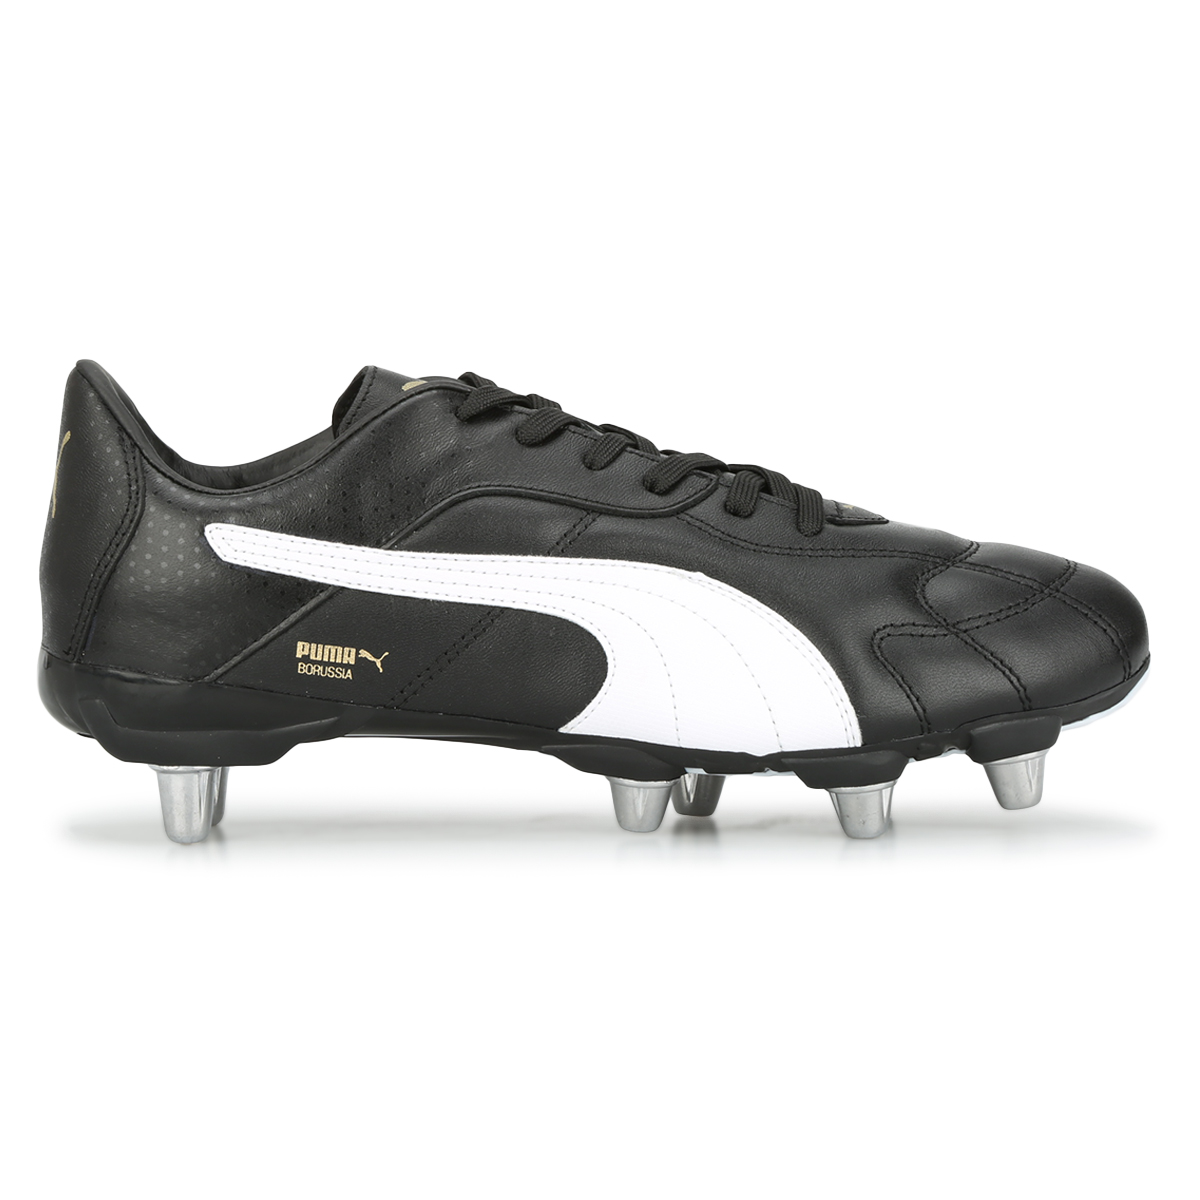 Botines Puma Borussia Rugby H8,  image number null